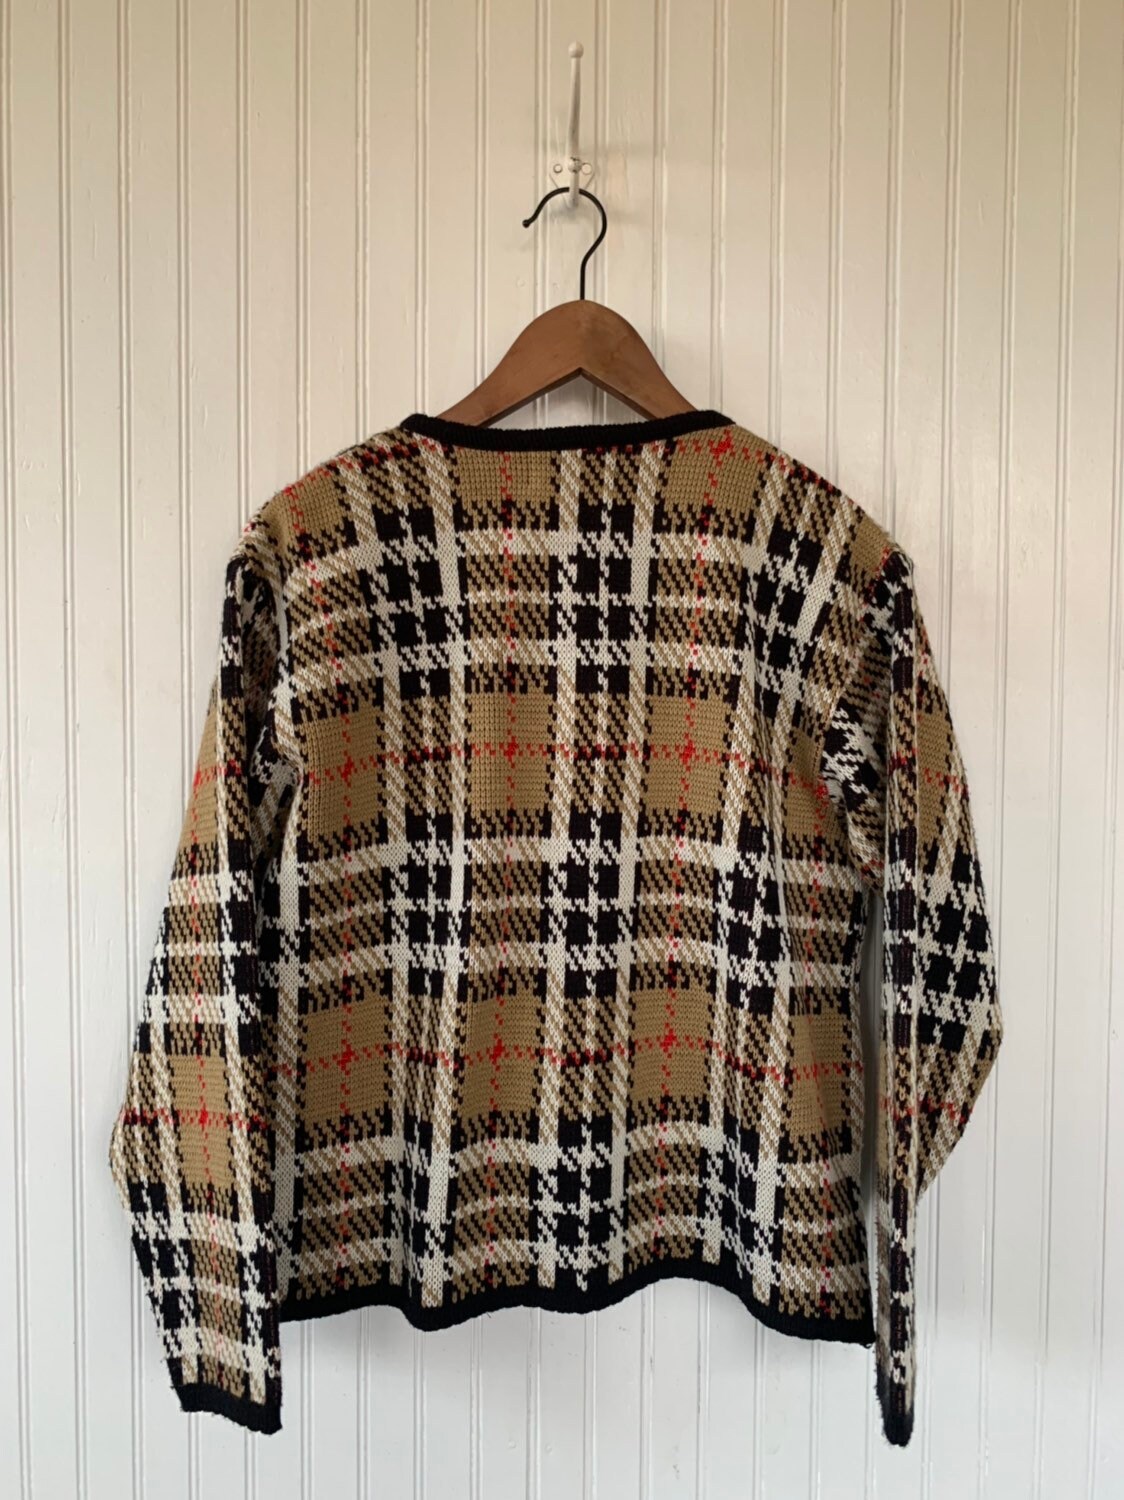 Vintage 80s Tally-Ho Tan Black White Red Plaid Cardigan Sweater Faux ...